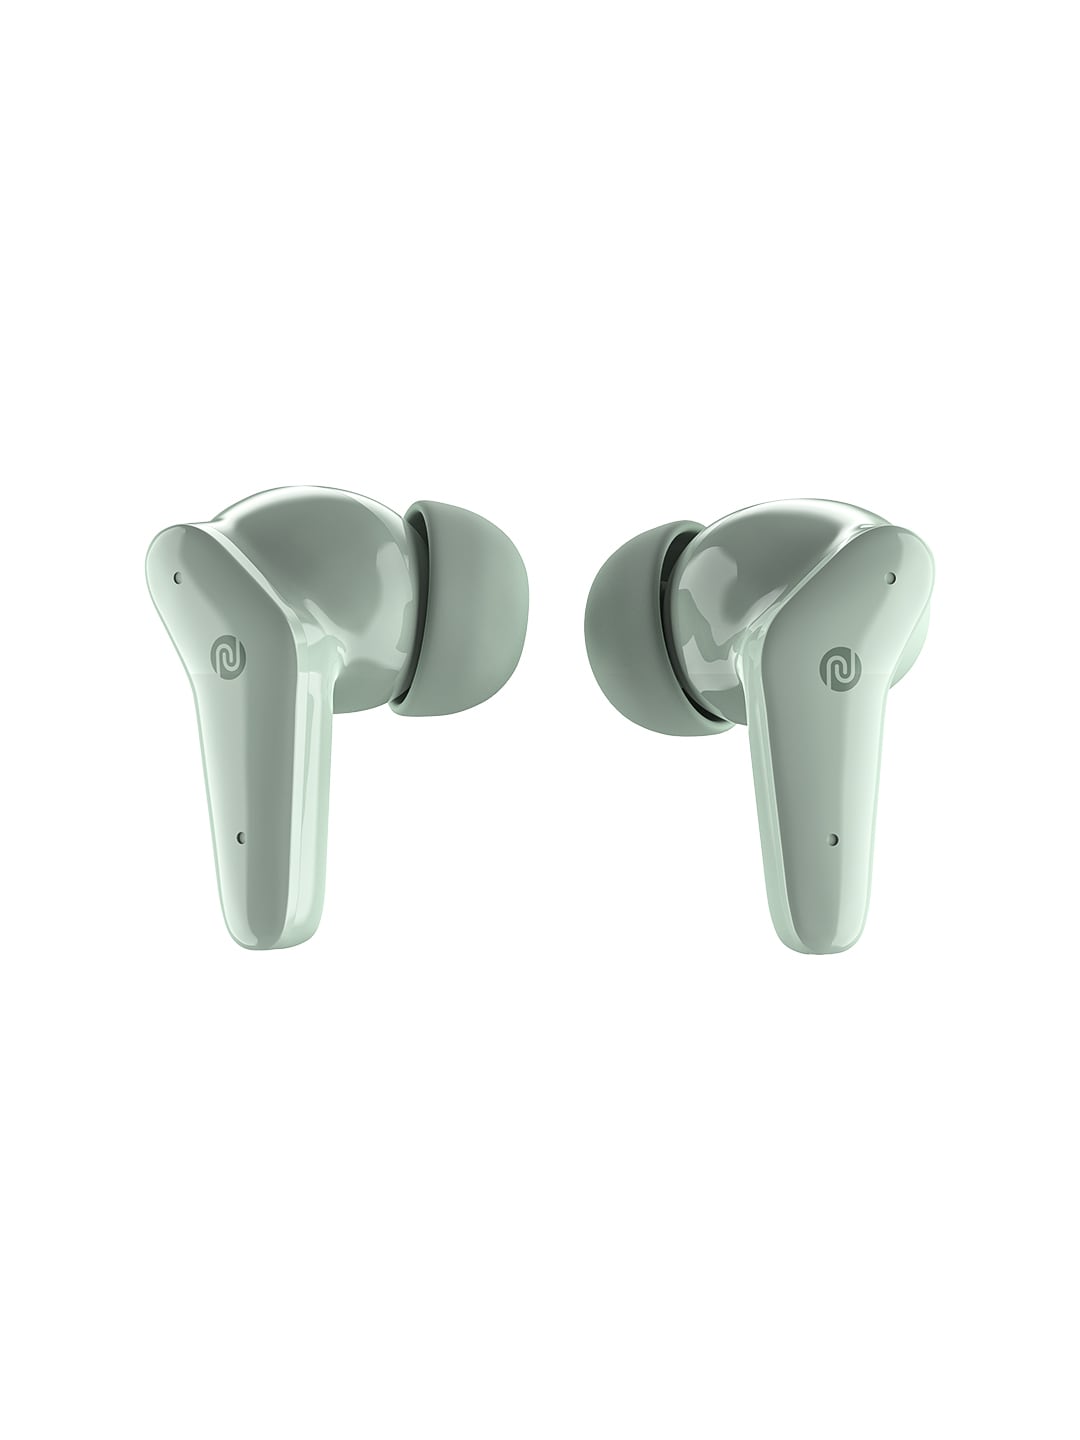 NOISE Unisex Blue Noise Buds VS102 Truly Wireless Bluetooth Earbuds Price in India